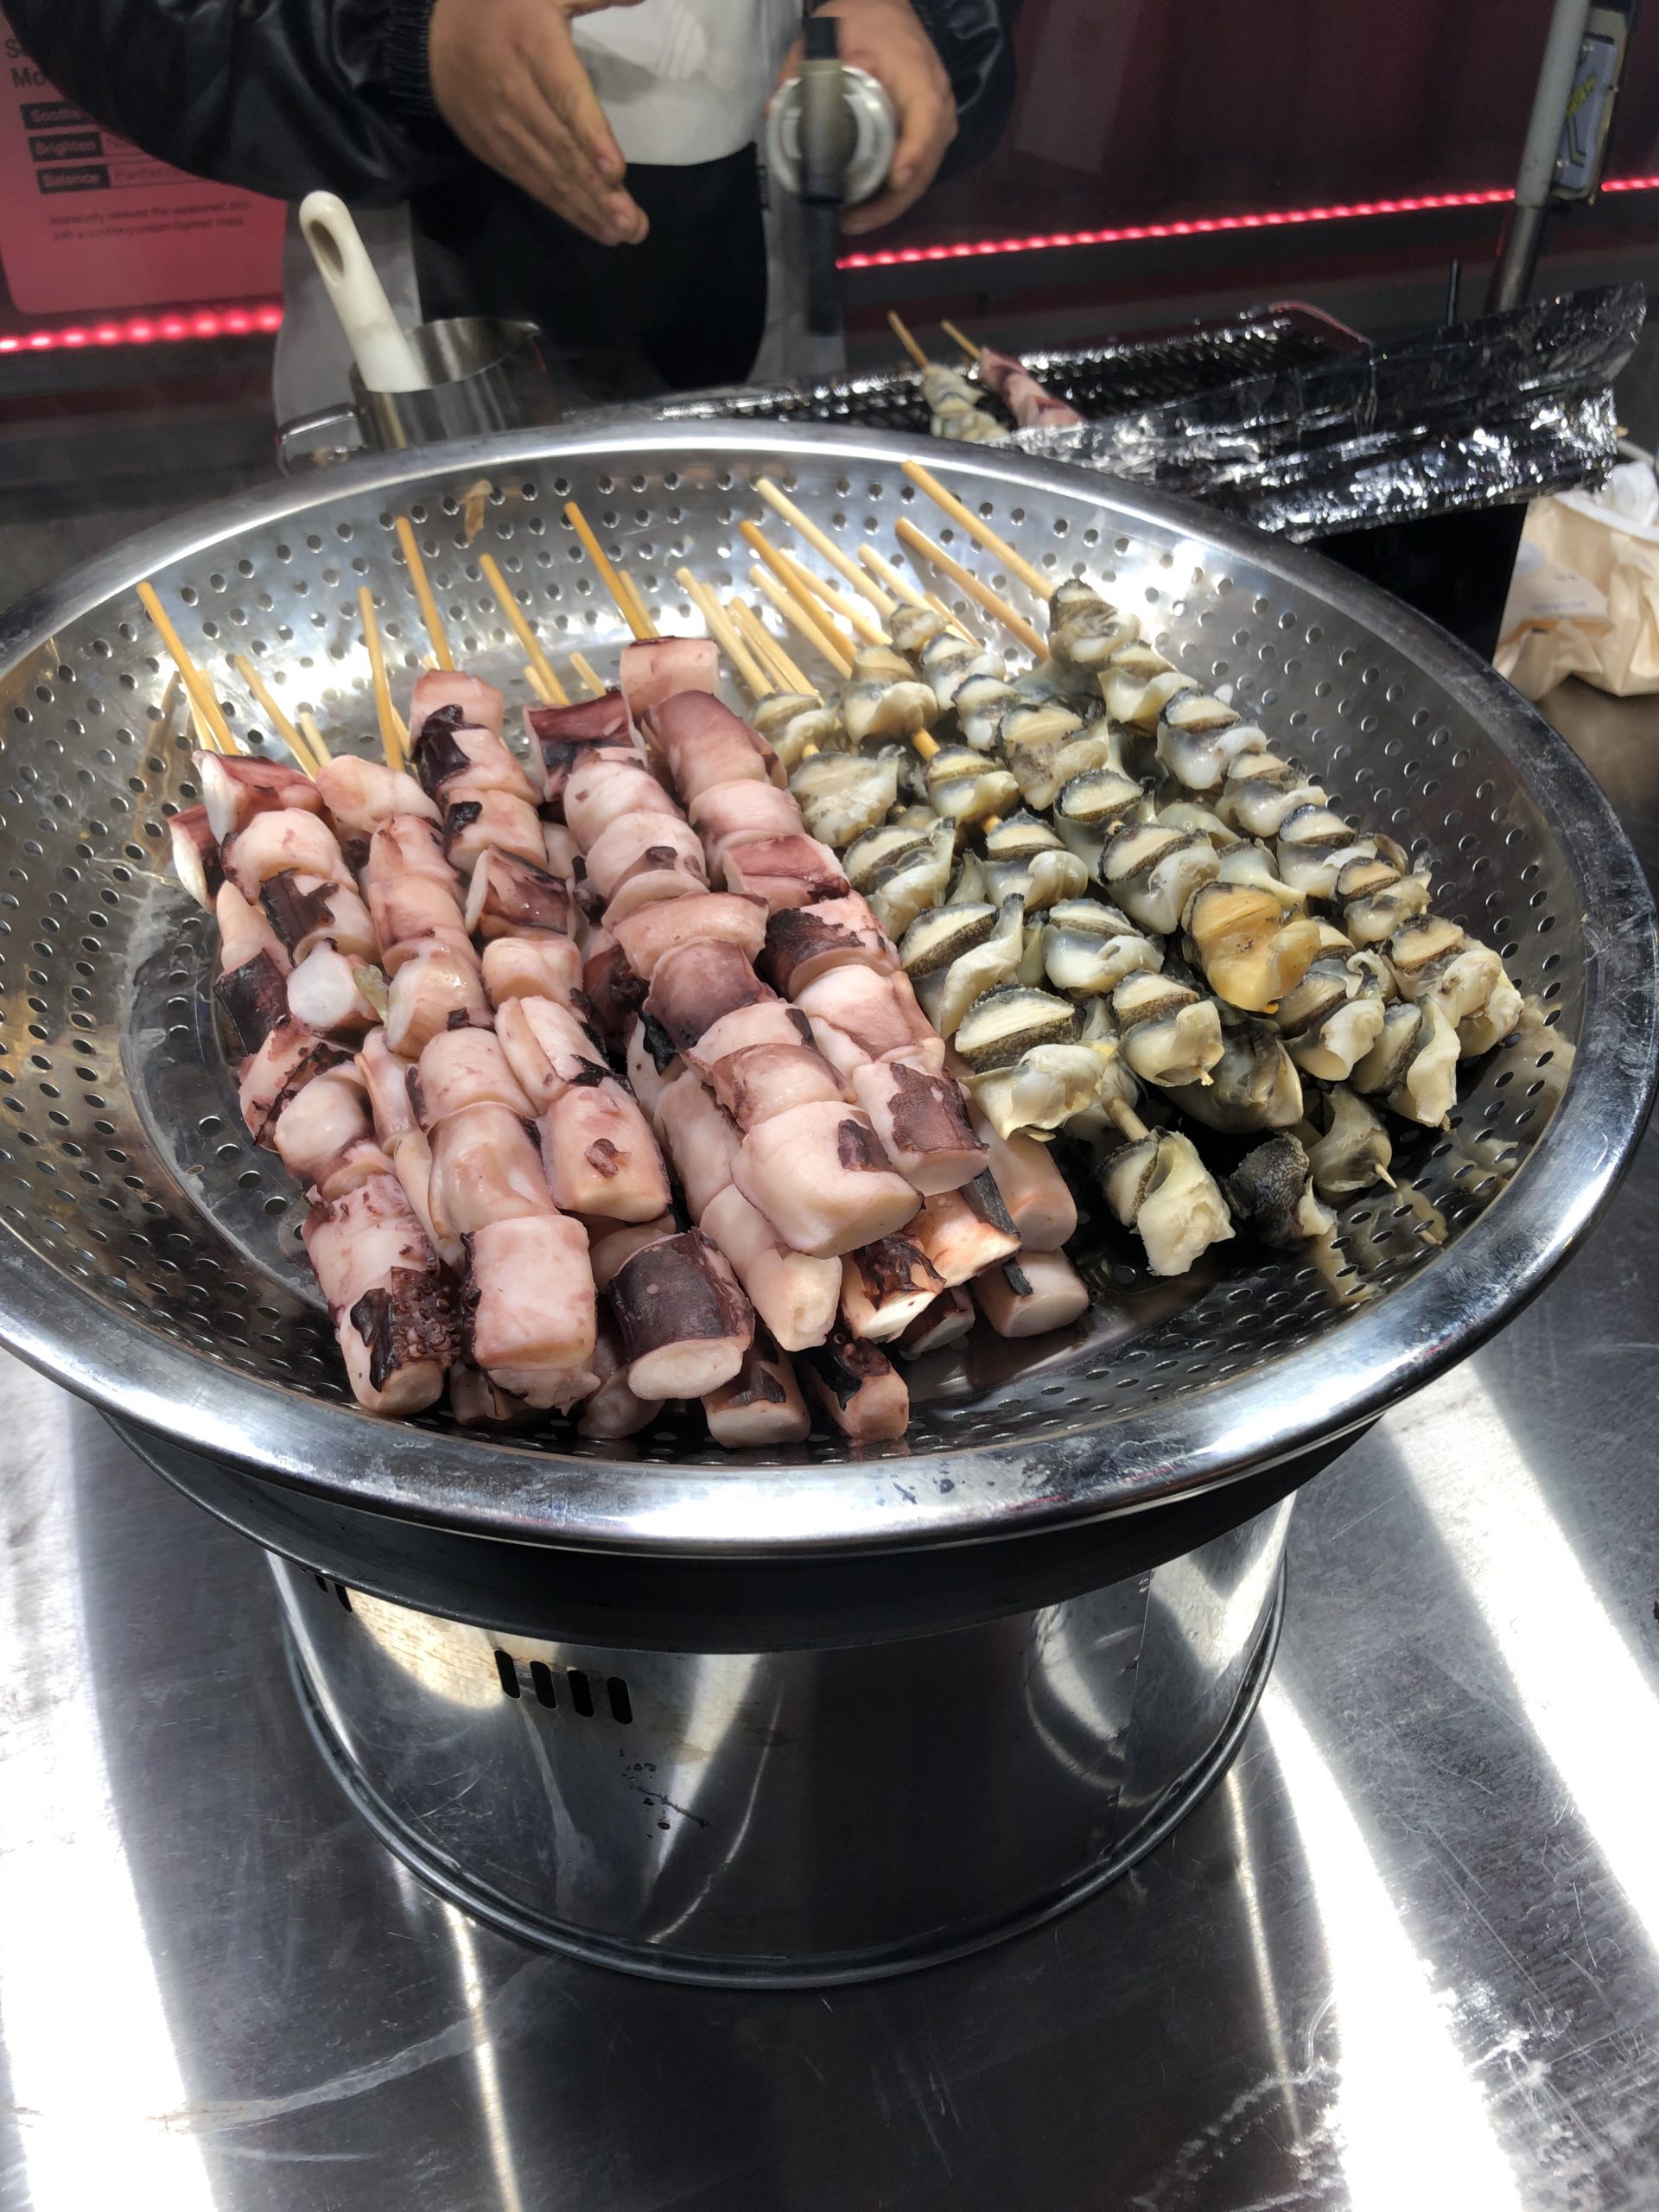 Seafood Skewers from the night markets in Seoul